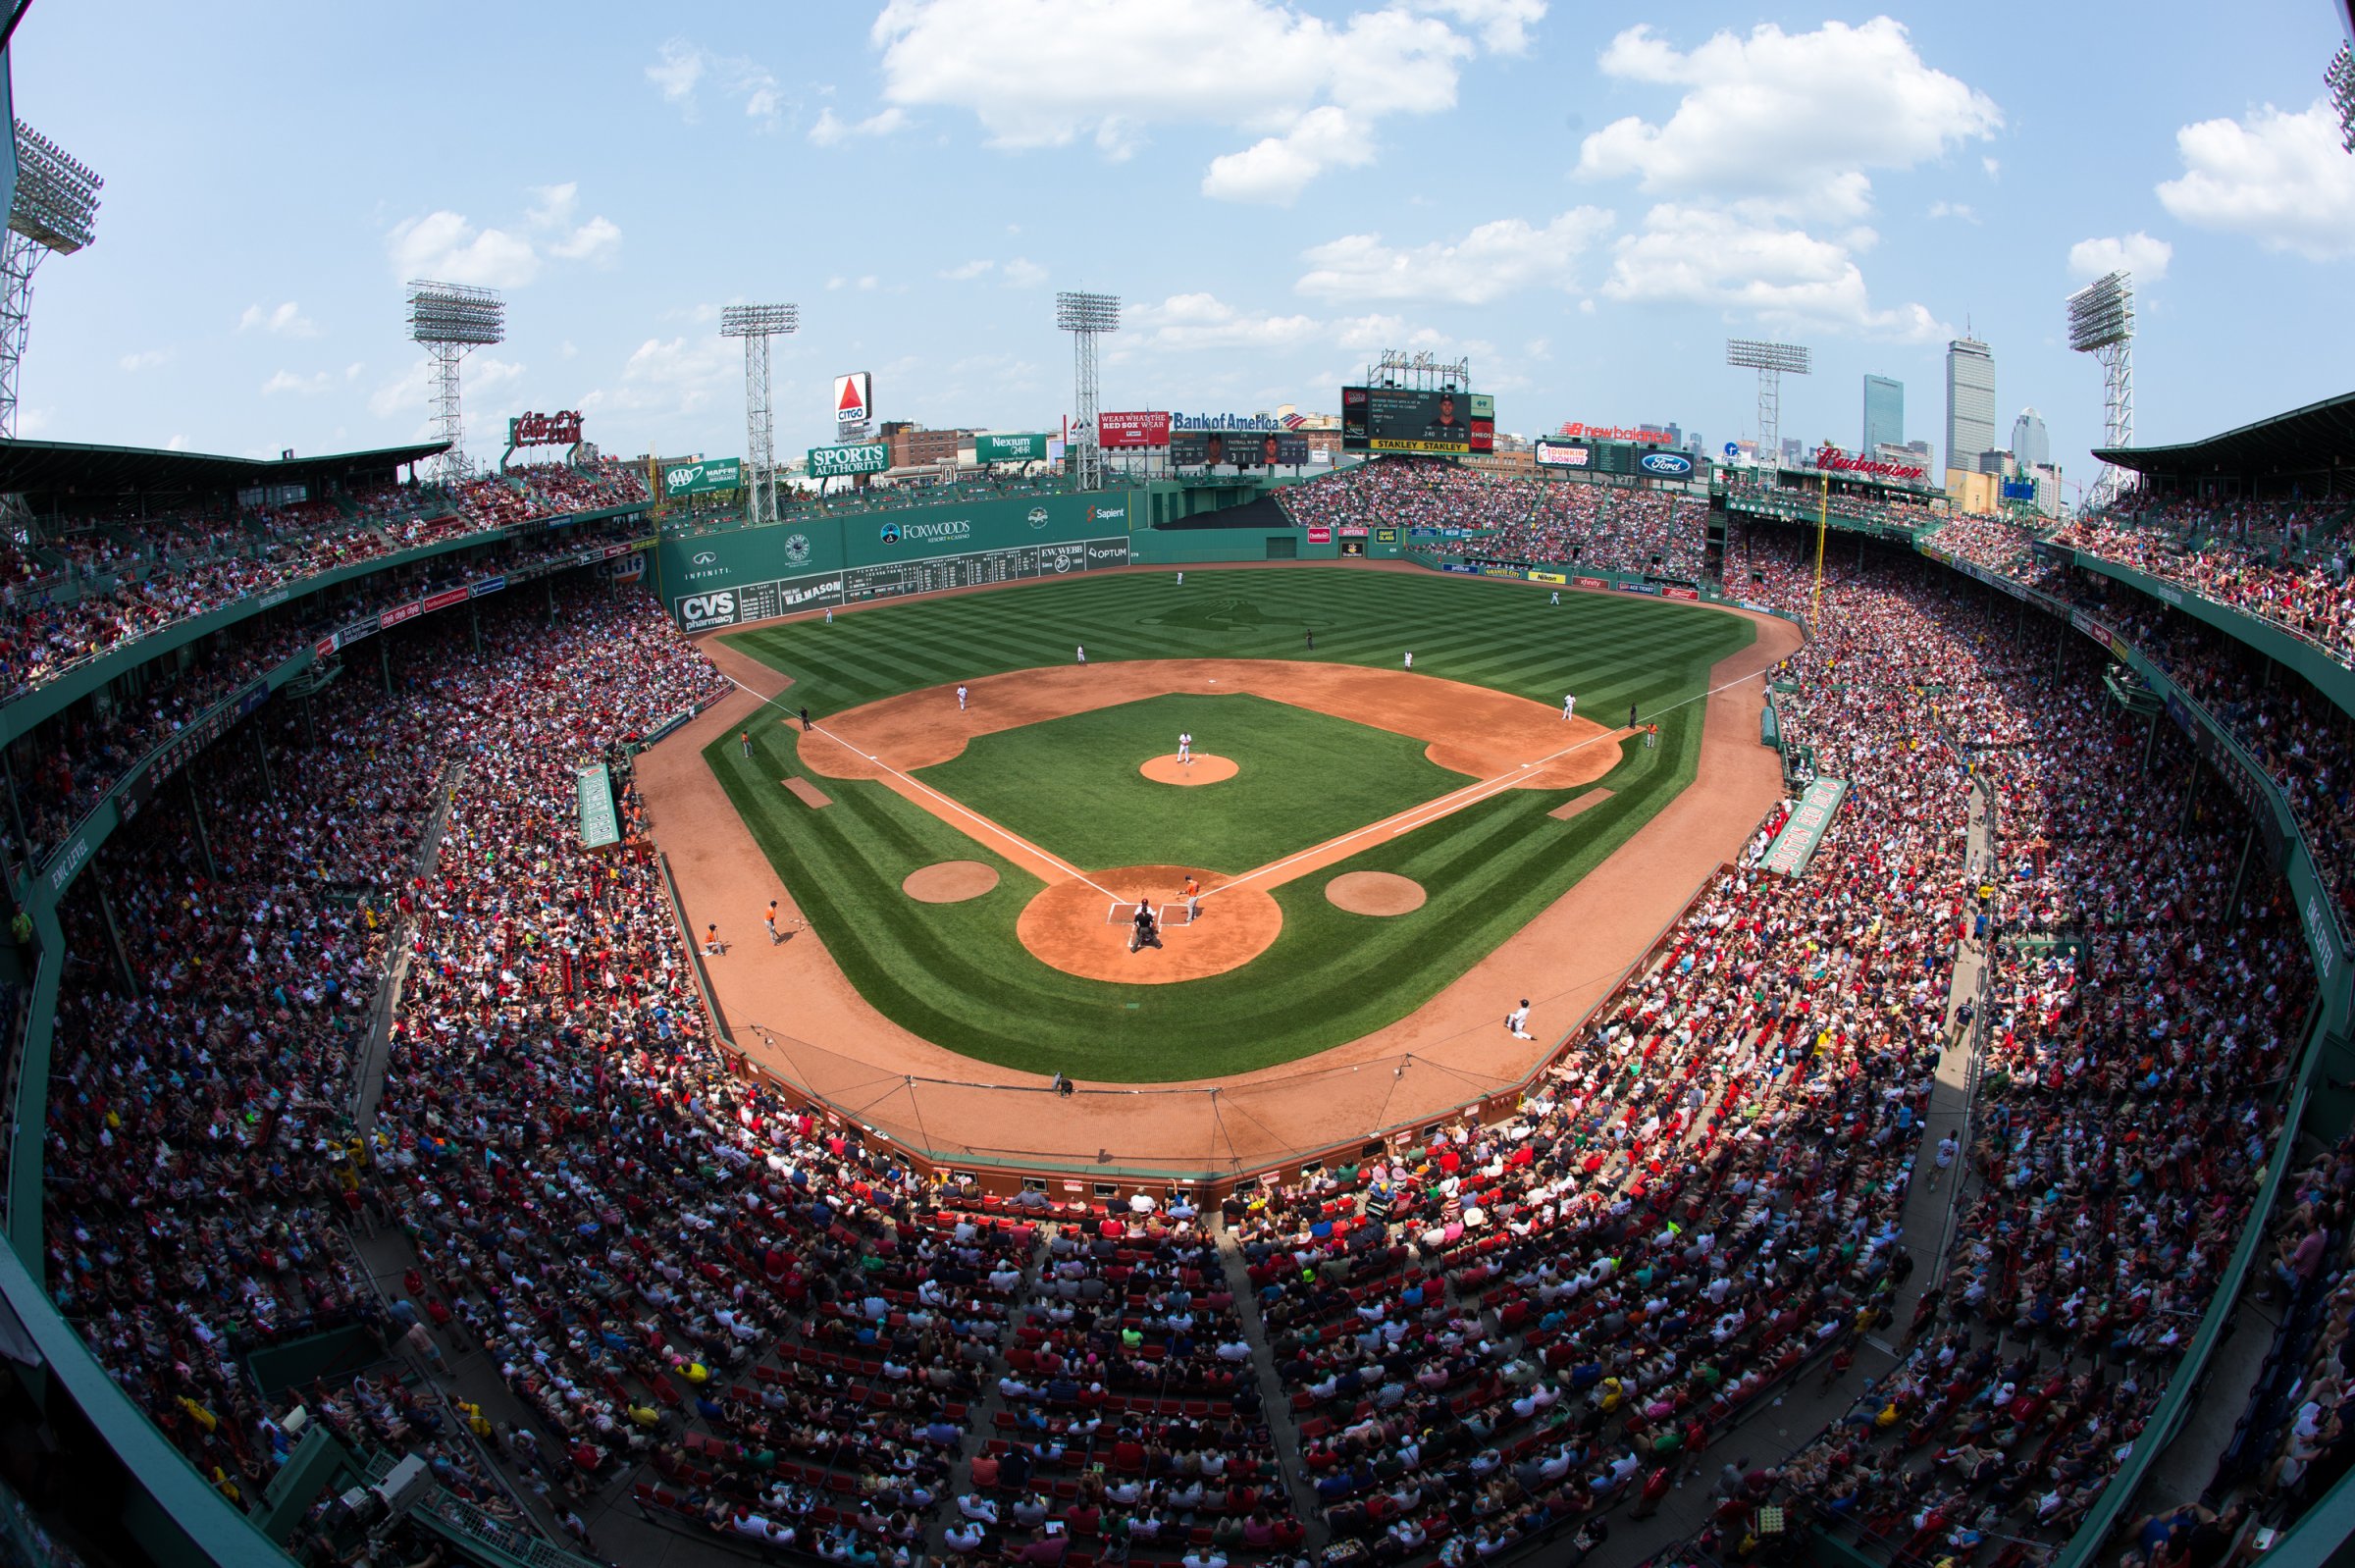 The Boston Red Sox play a game against the Houston Astros at Fenway Park on July 5, 2015 in Boston, Massachusetts.